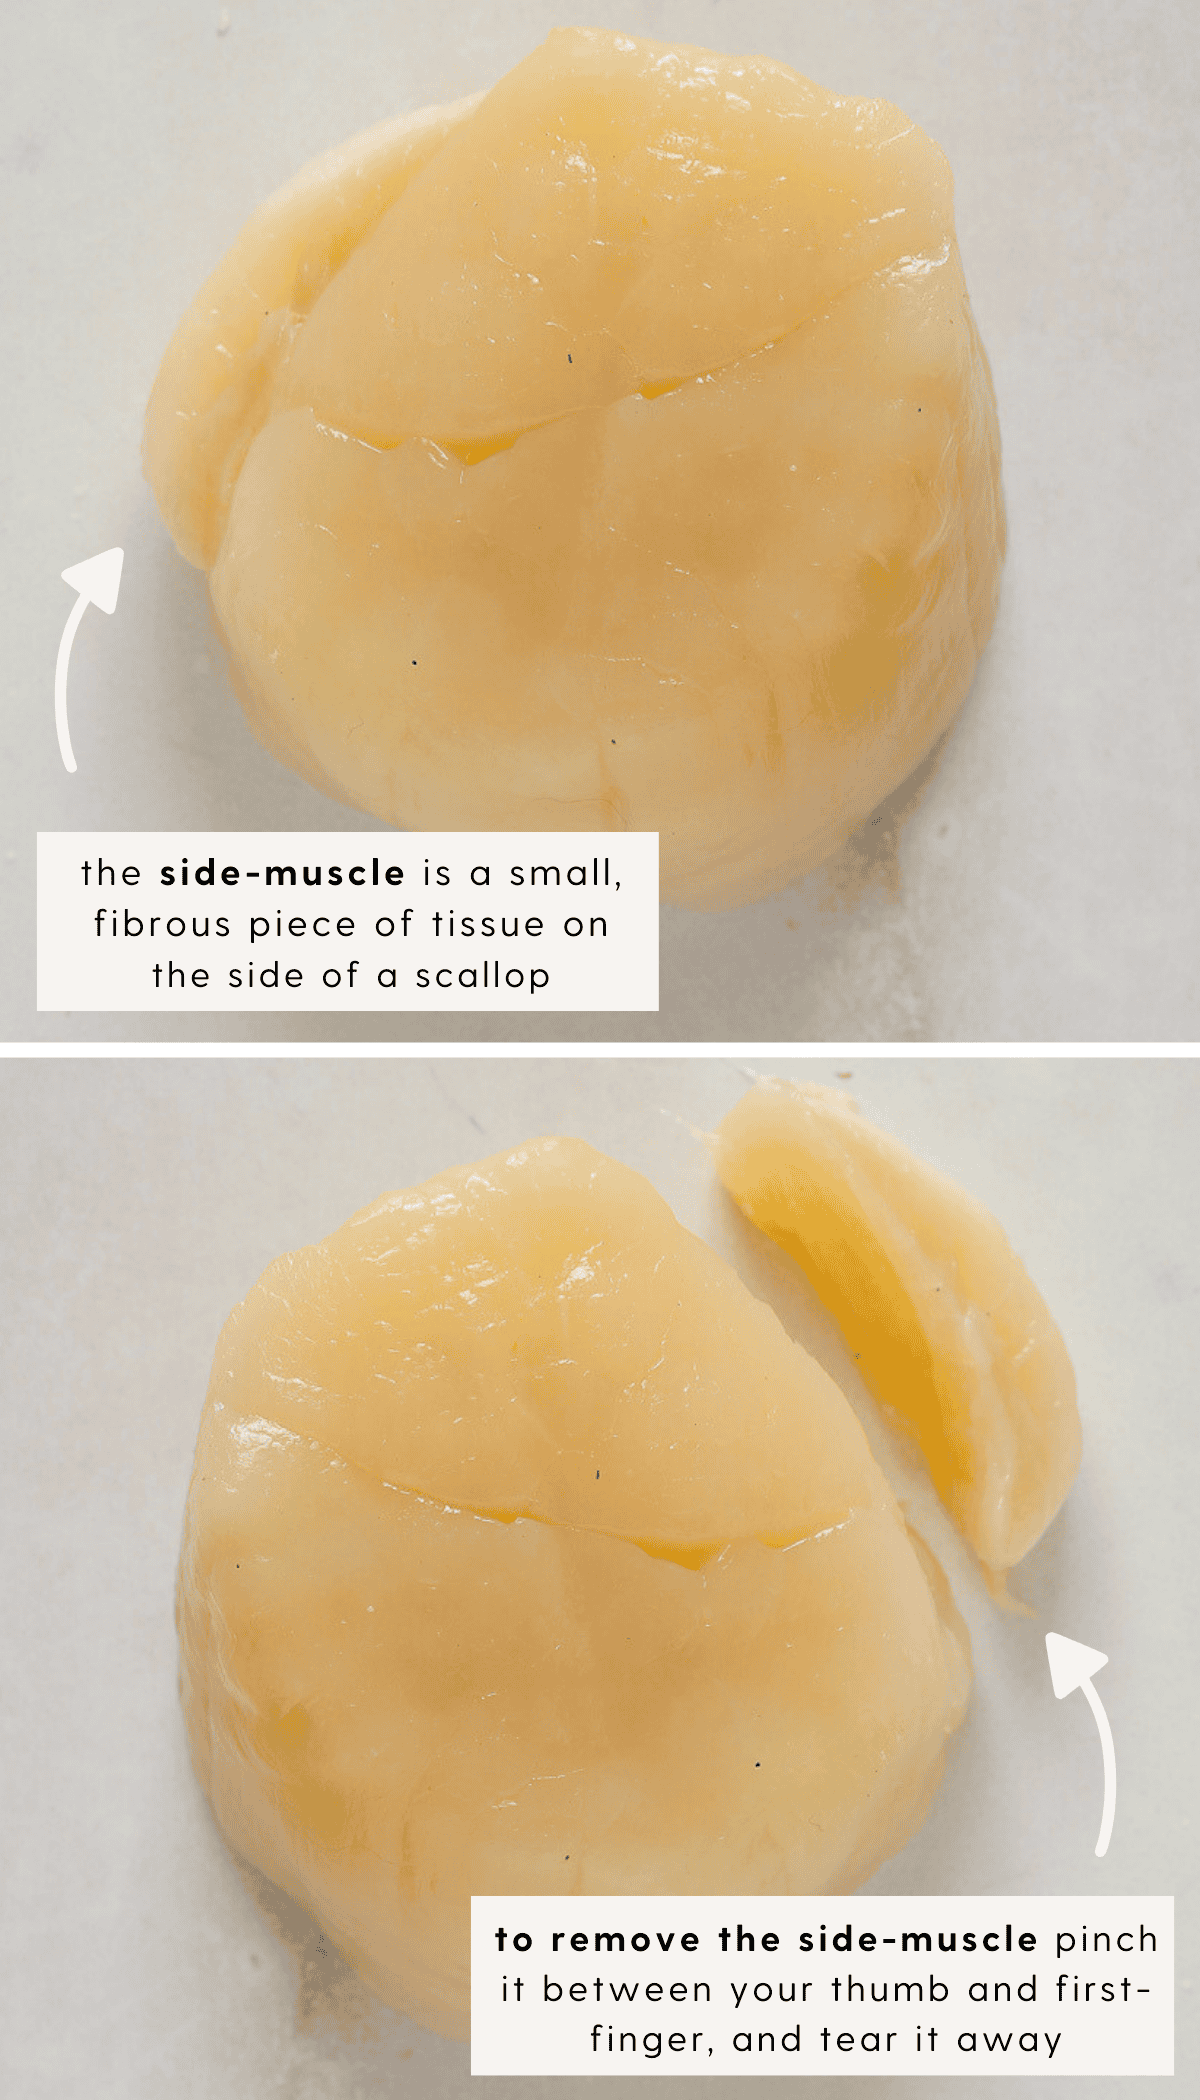 Top: a whole, raw scallop. Bottom: a whole, raw scallop with the side muscle detached.